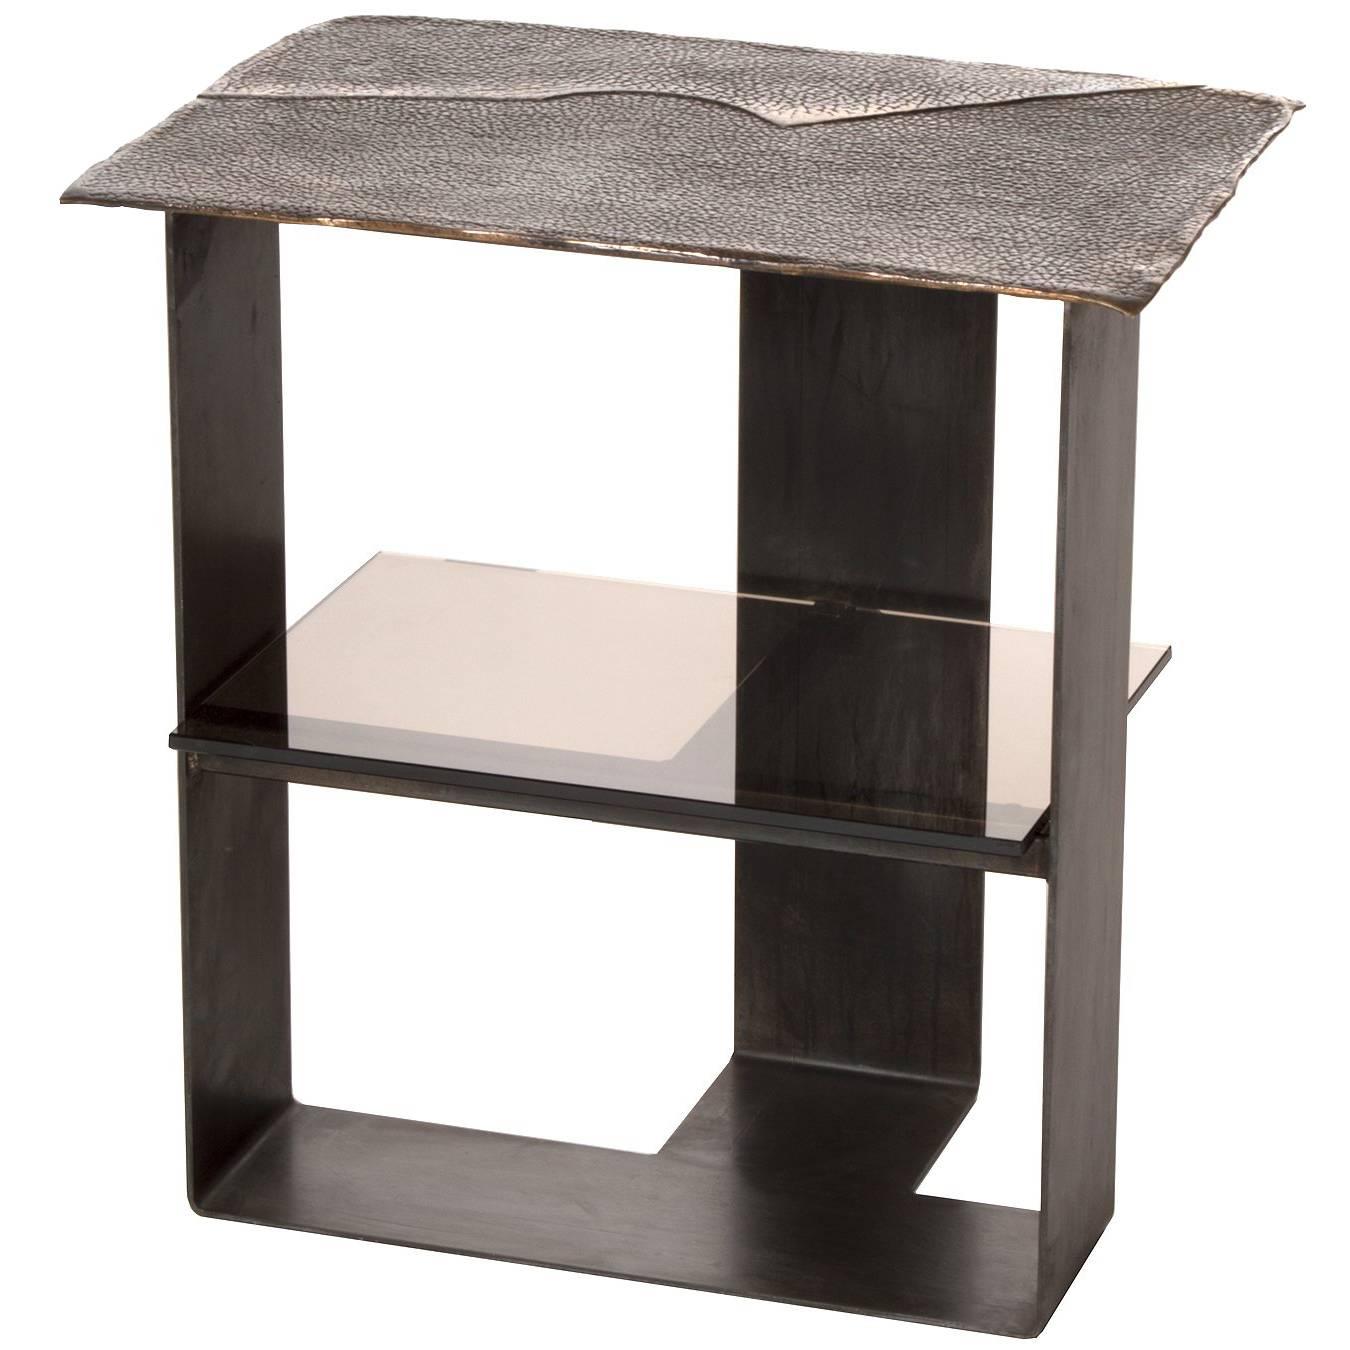 Domito End Table Contemporary Cast Bronze Leather Texture Steel with Glass Shelf For Sale